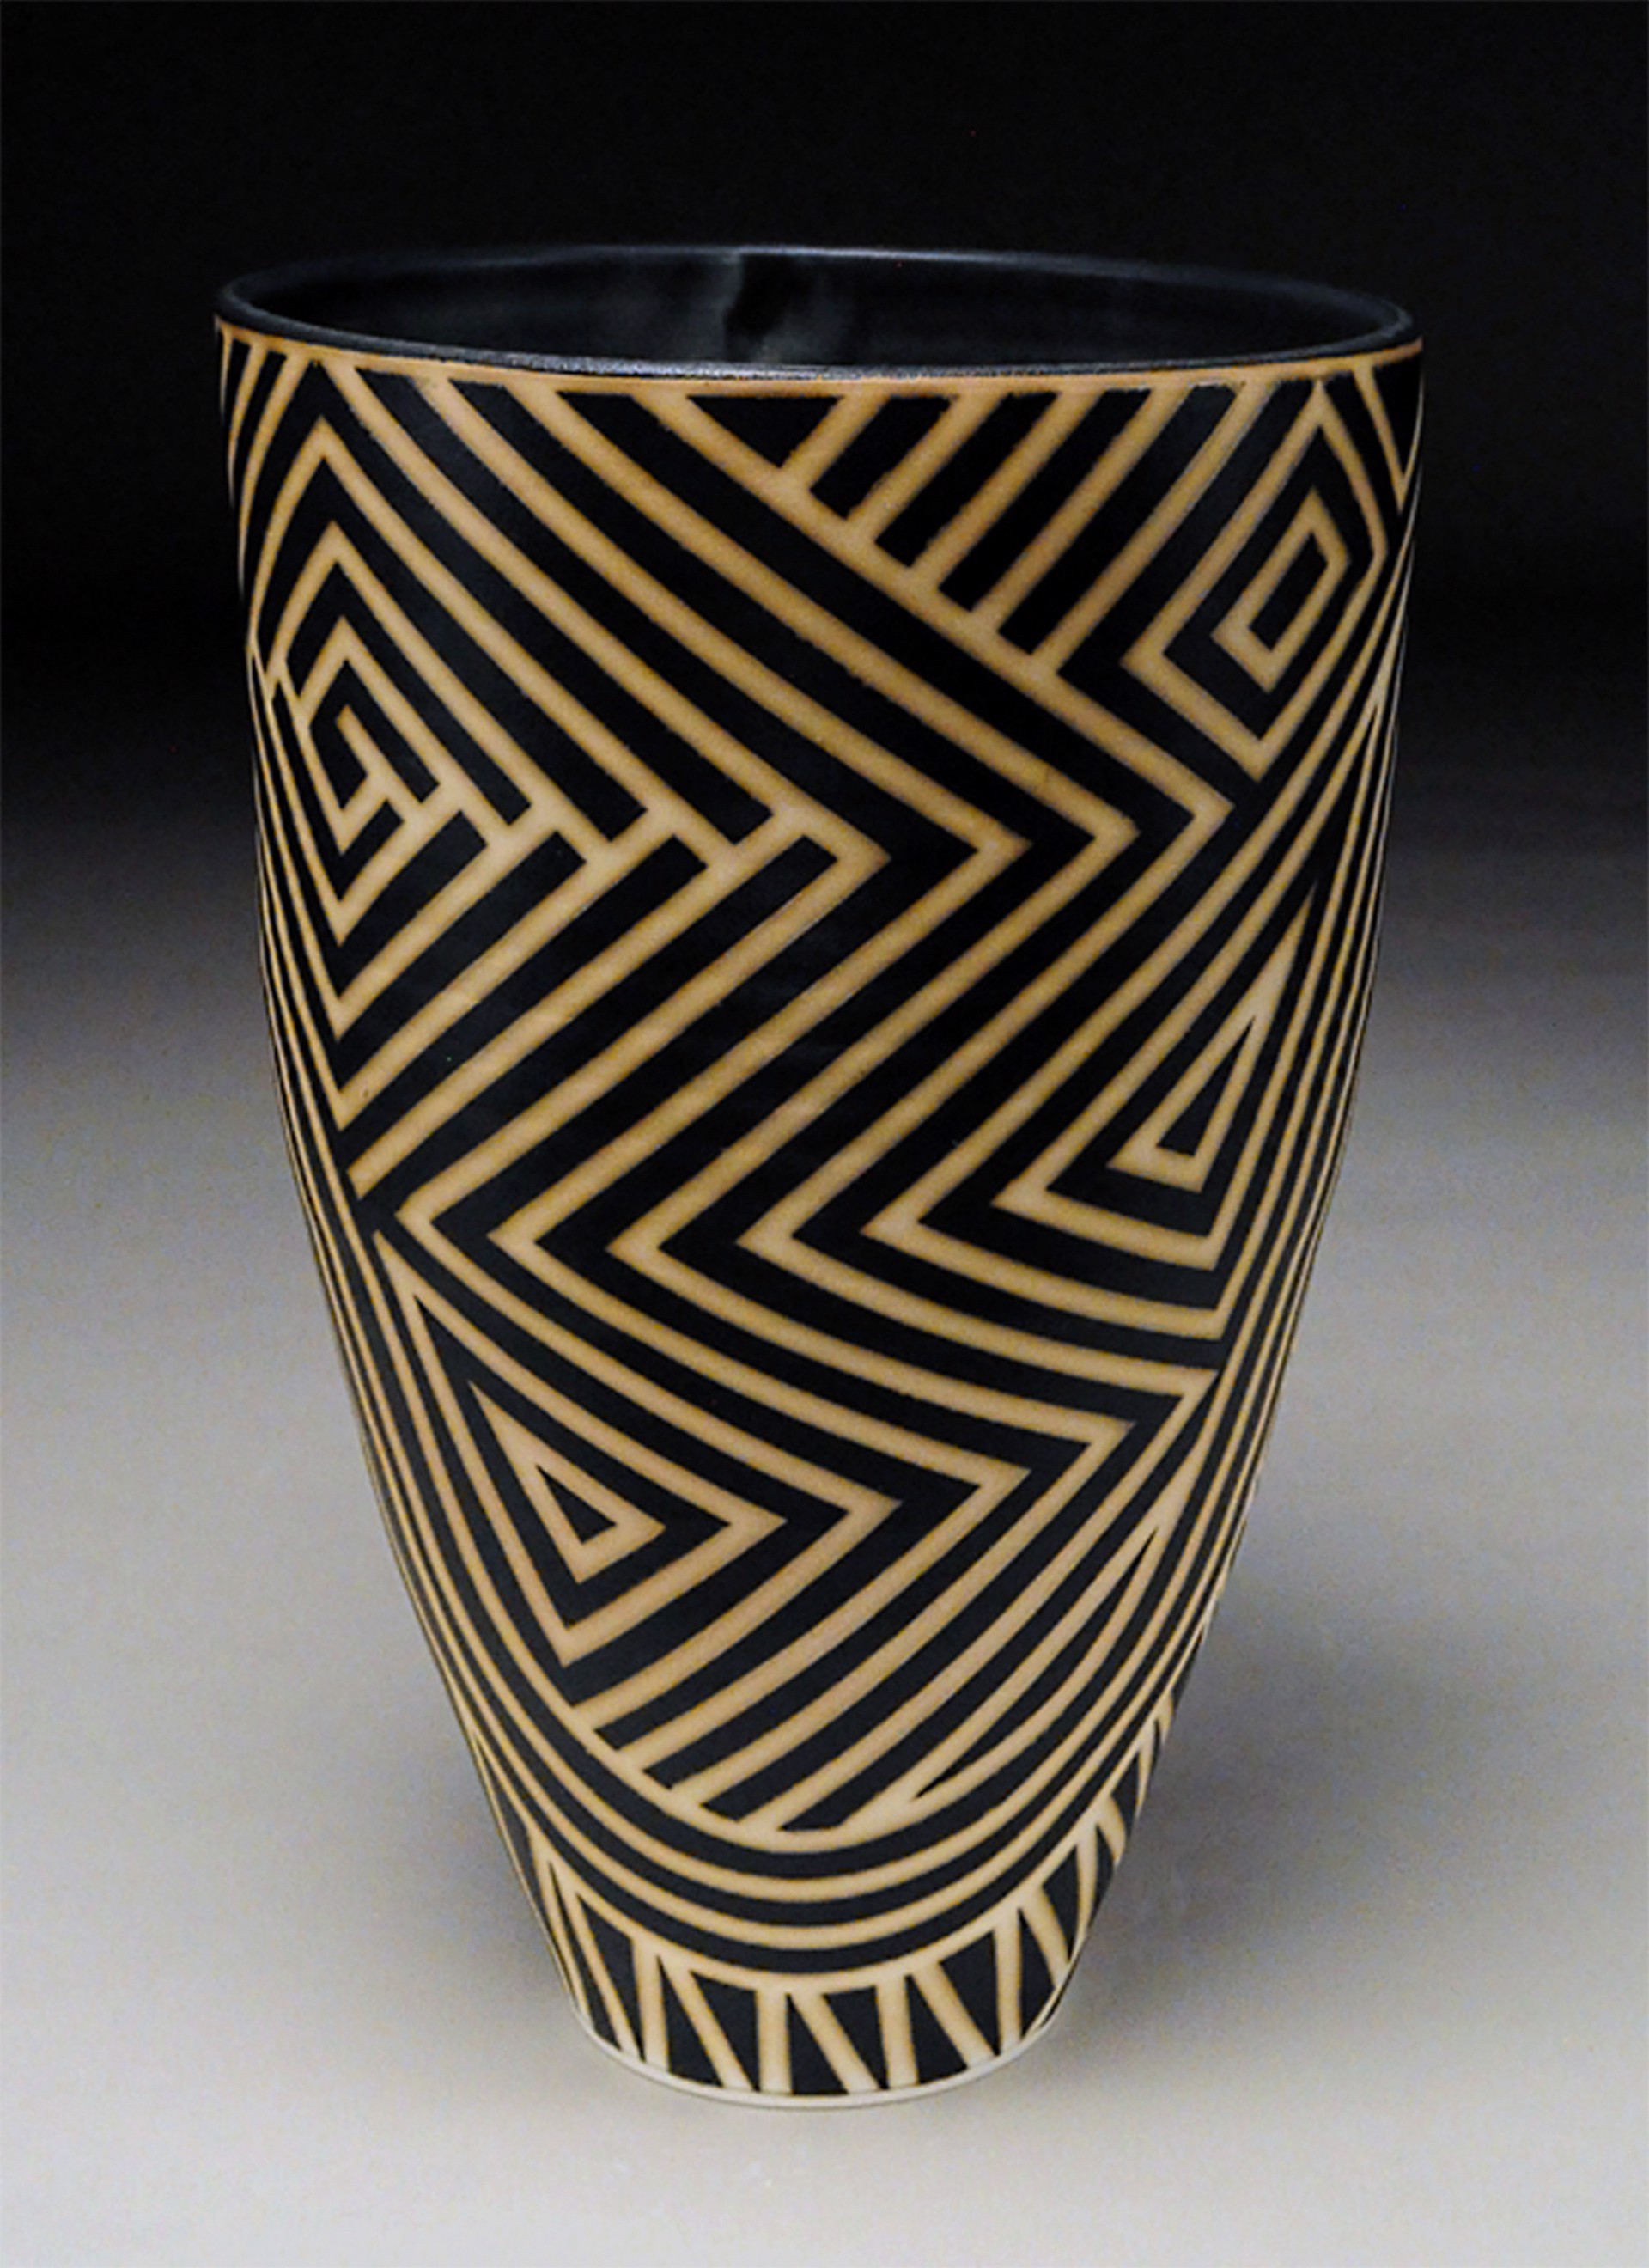 #14- Tall Bowl with Stripes by N B